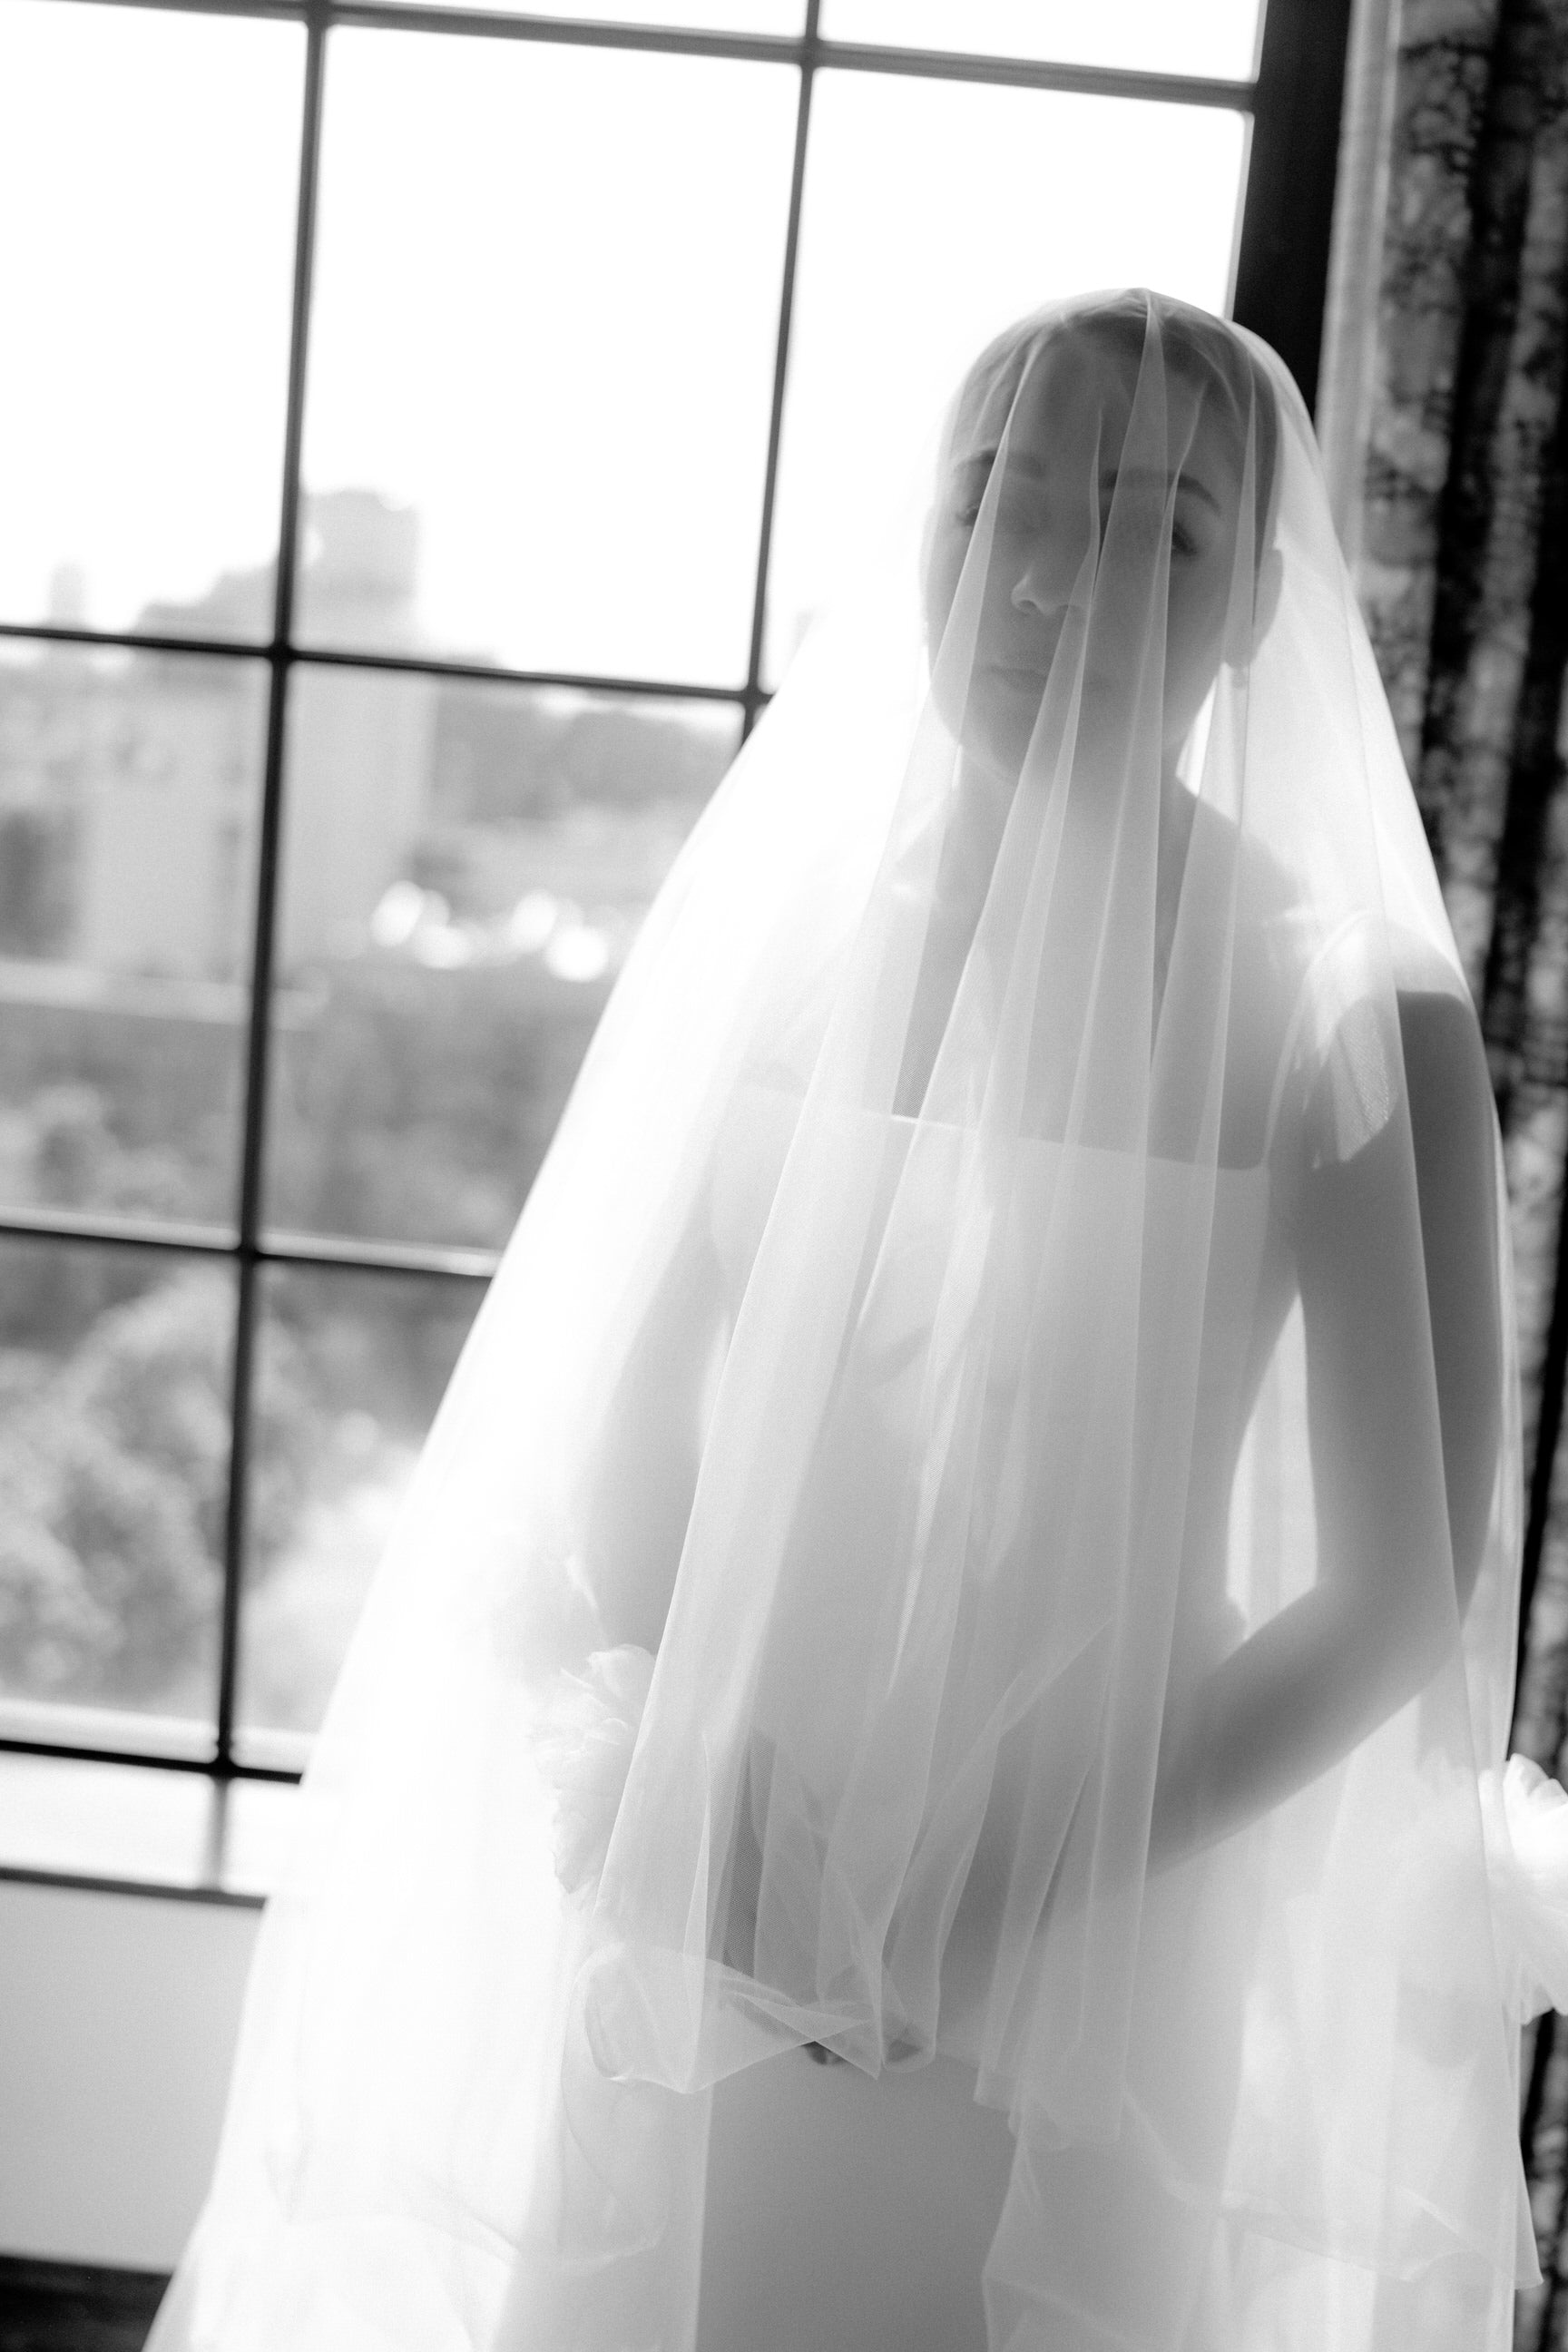 drop silk wedding veil with appliquéd tulle flowers scattered